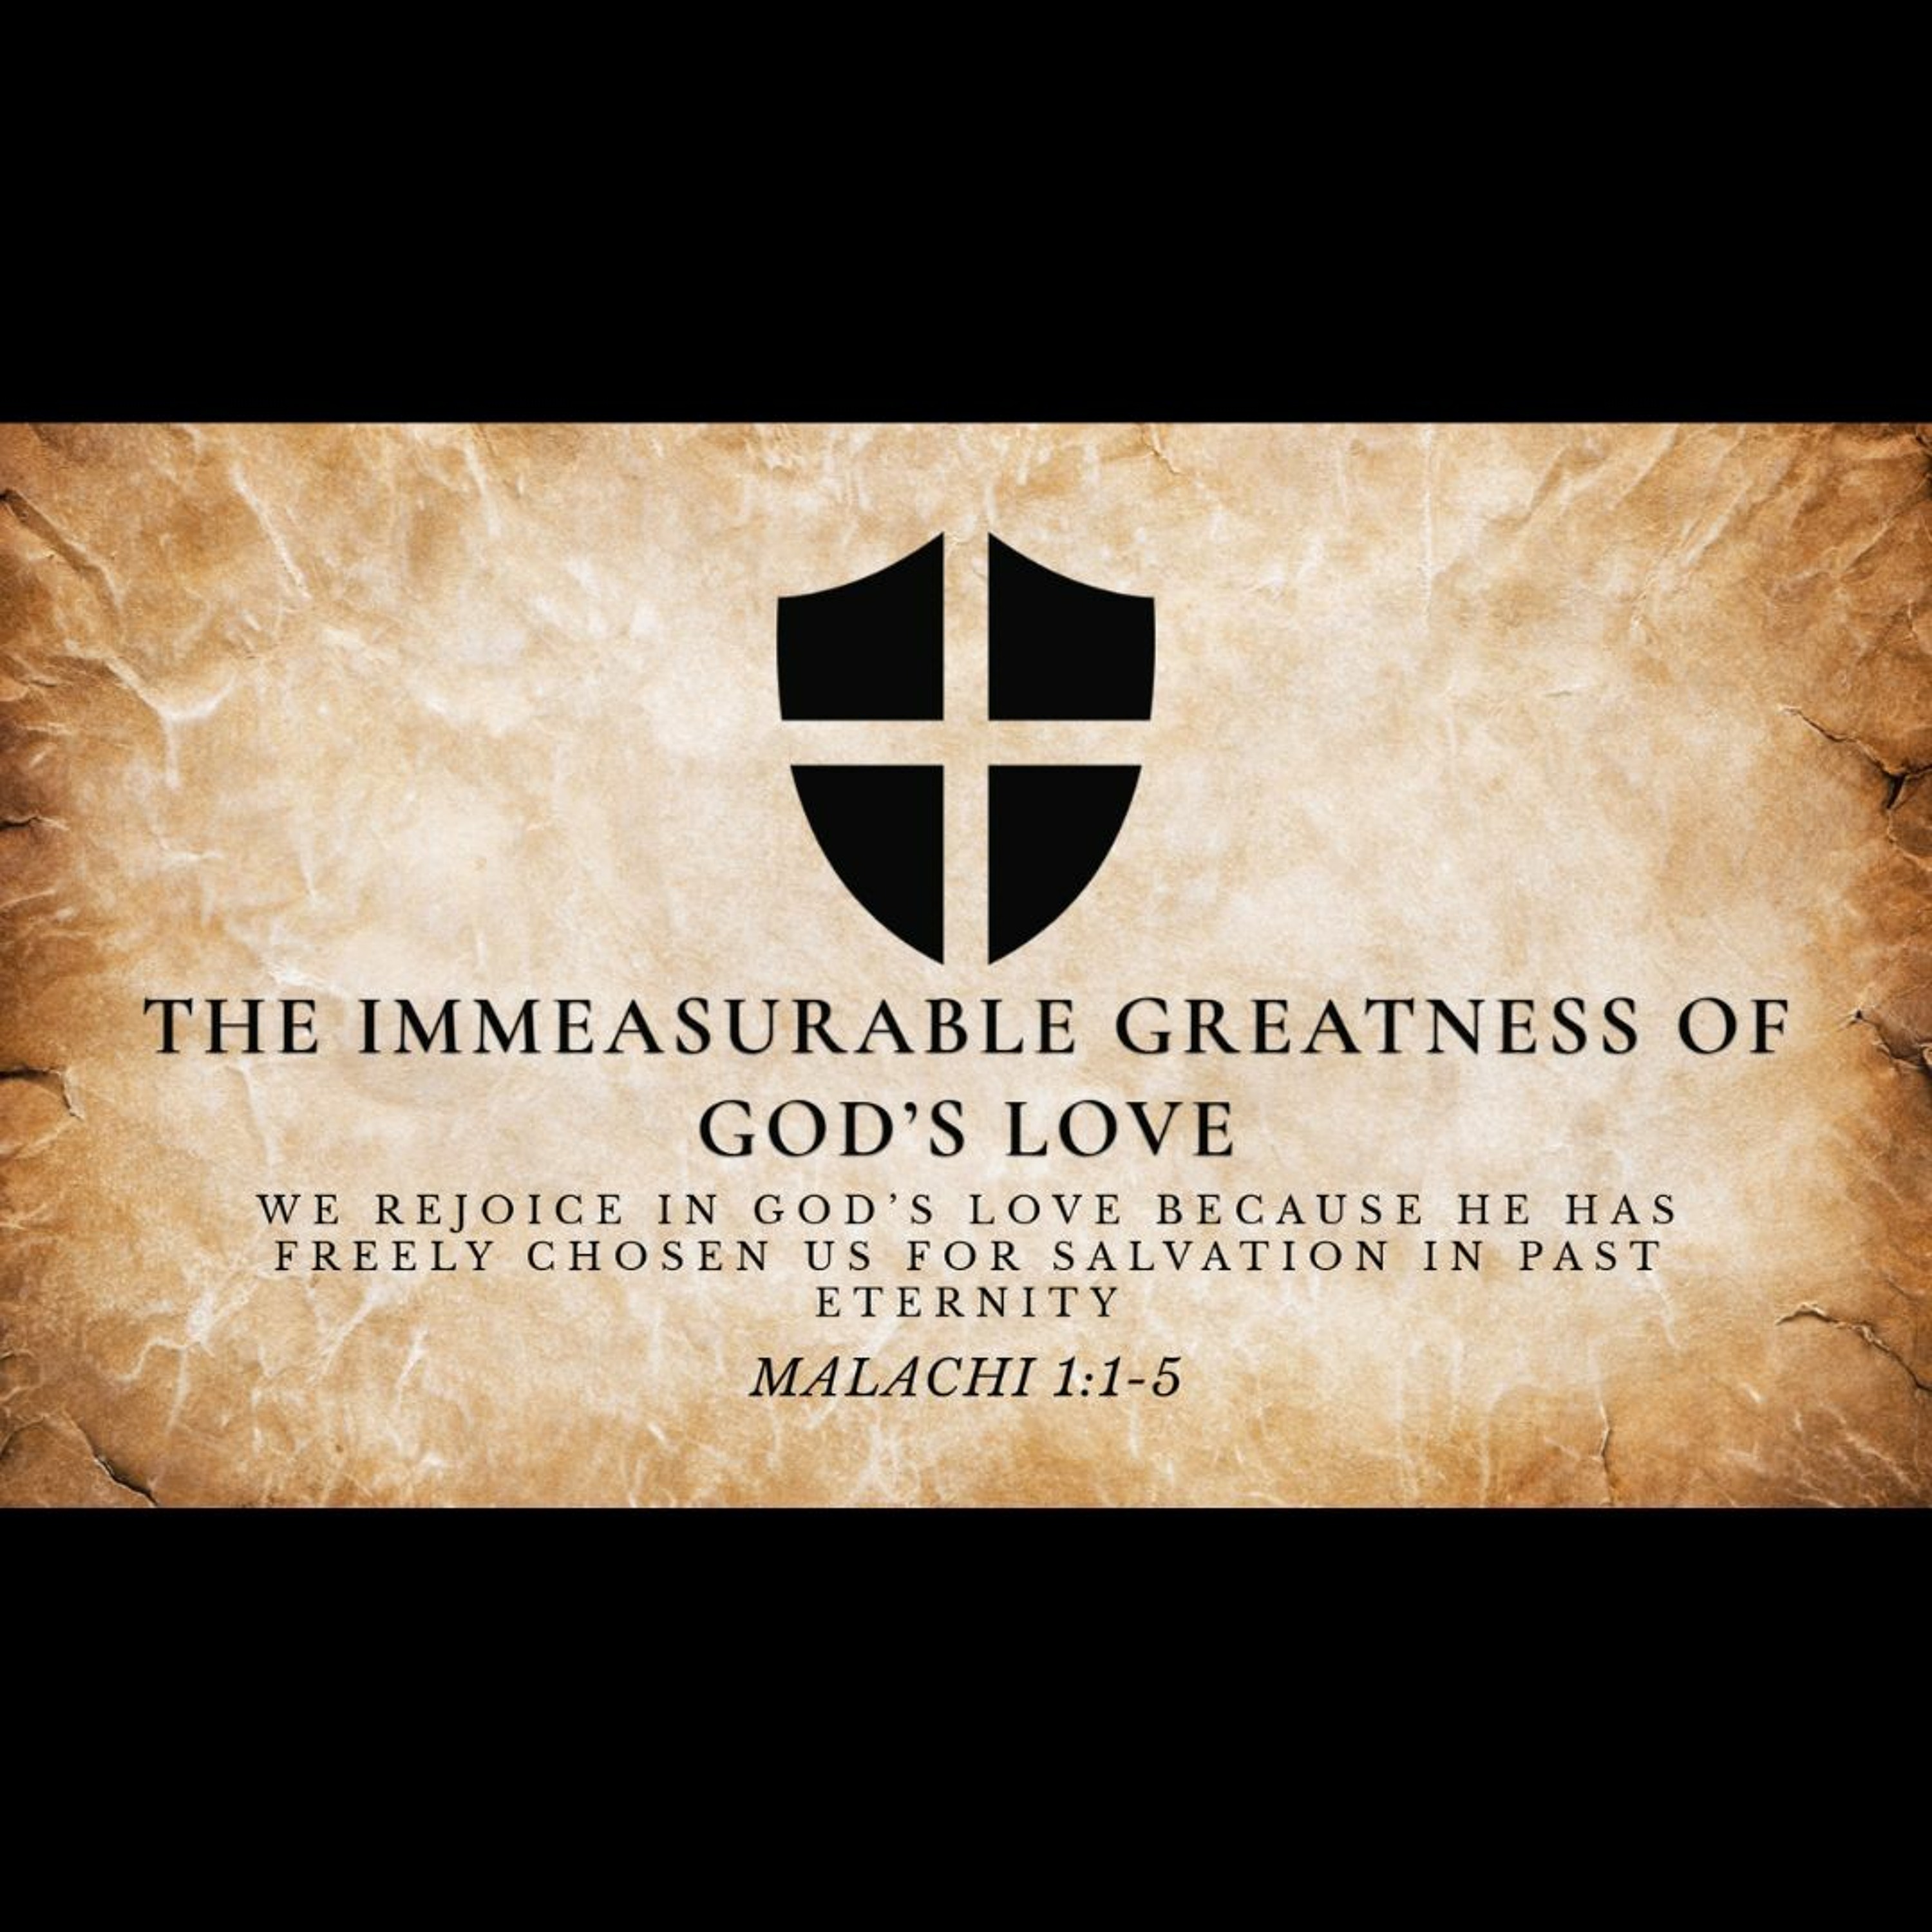 The Immeasurable Greatness of God’s Love (Malachi 1:1-5)